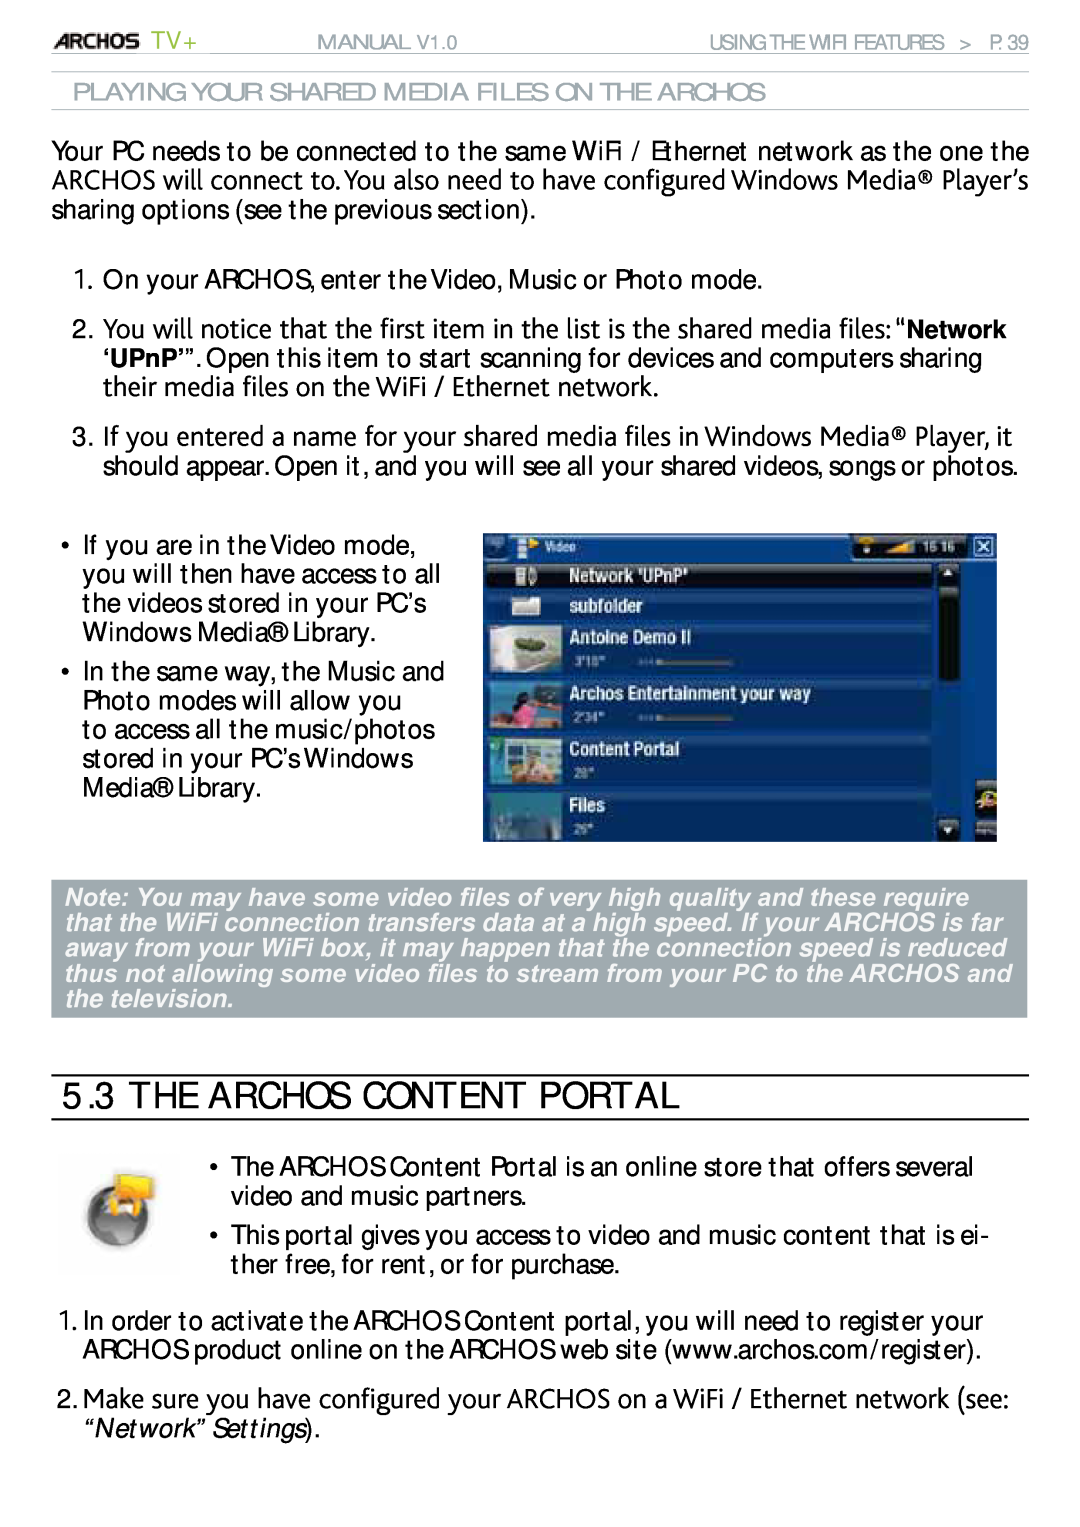 Archos 500973 user manual The Archos Content Portal,  On your ARCHOS, enter the Video, Music or Photo mode 